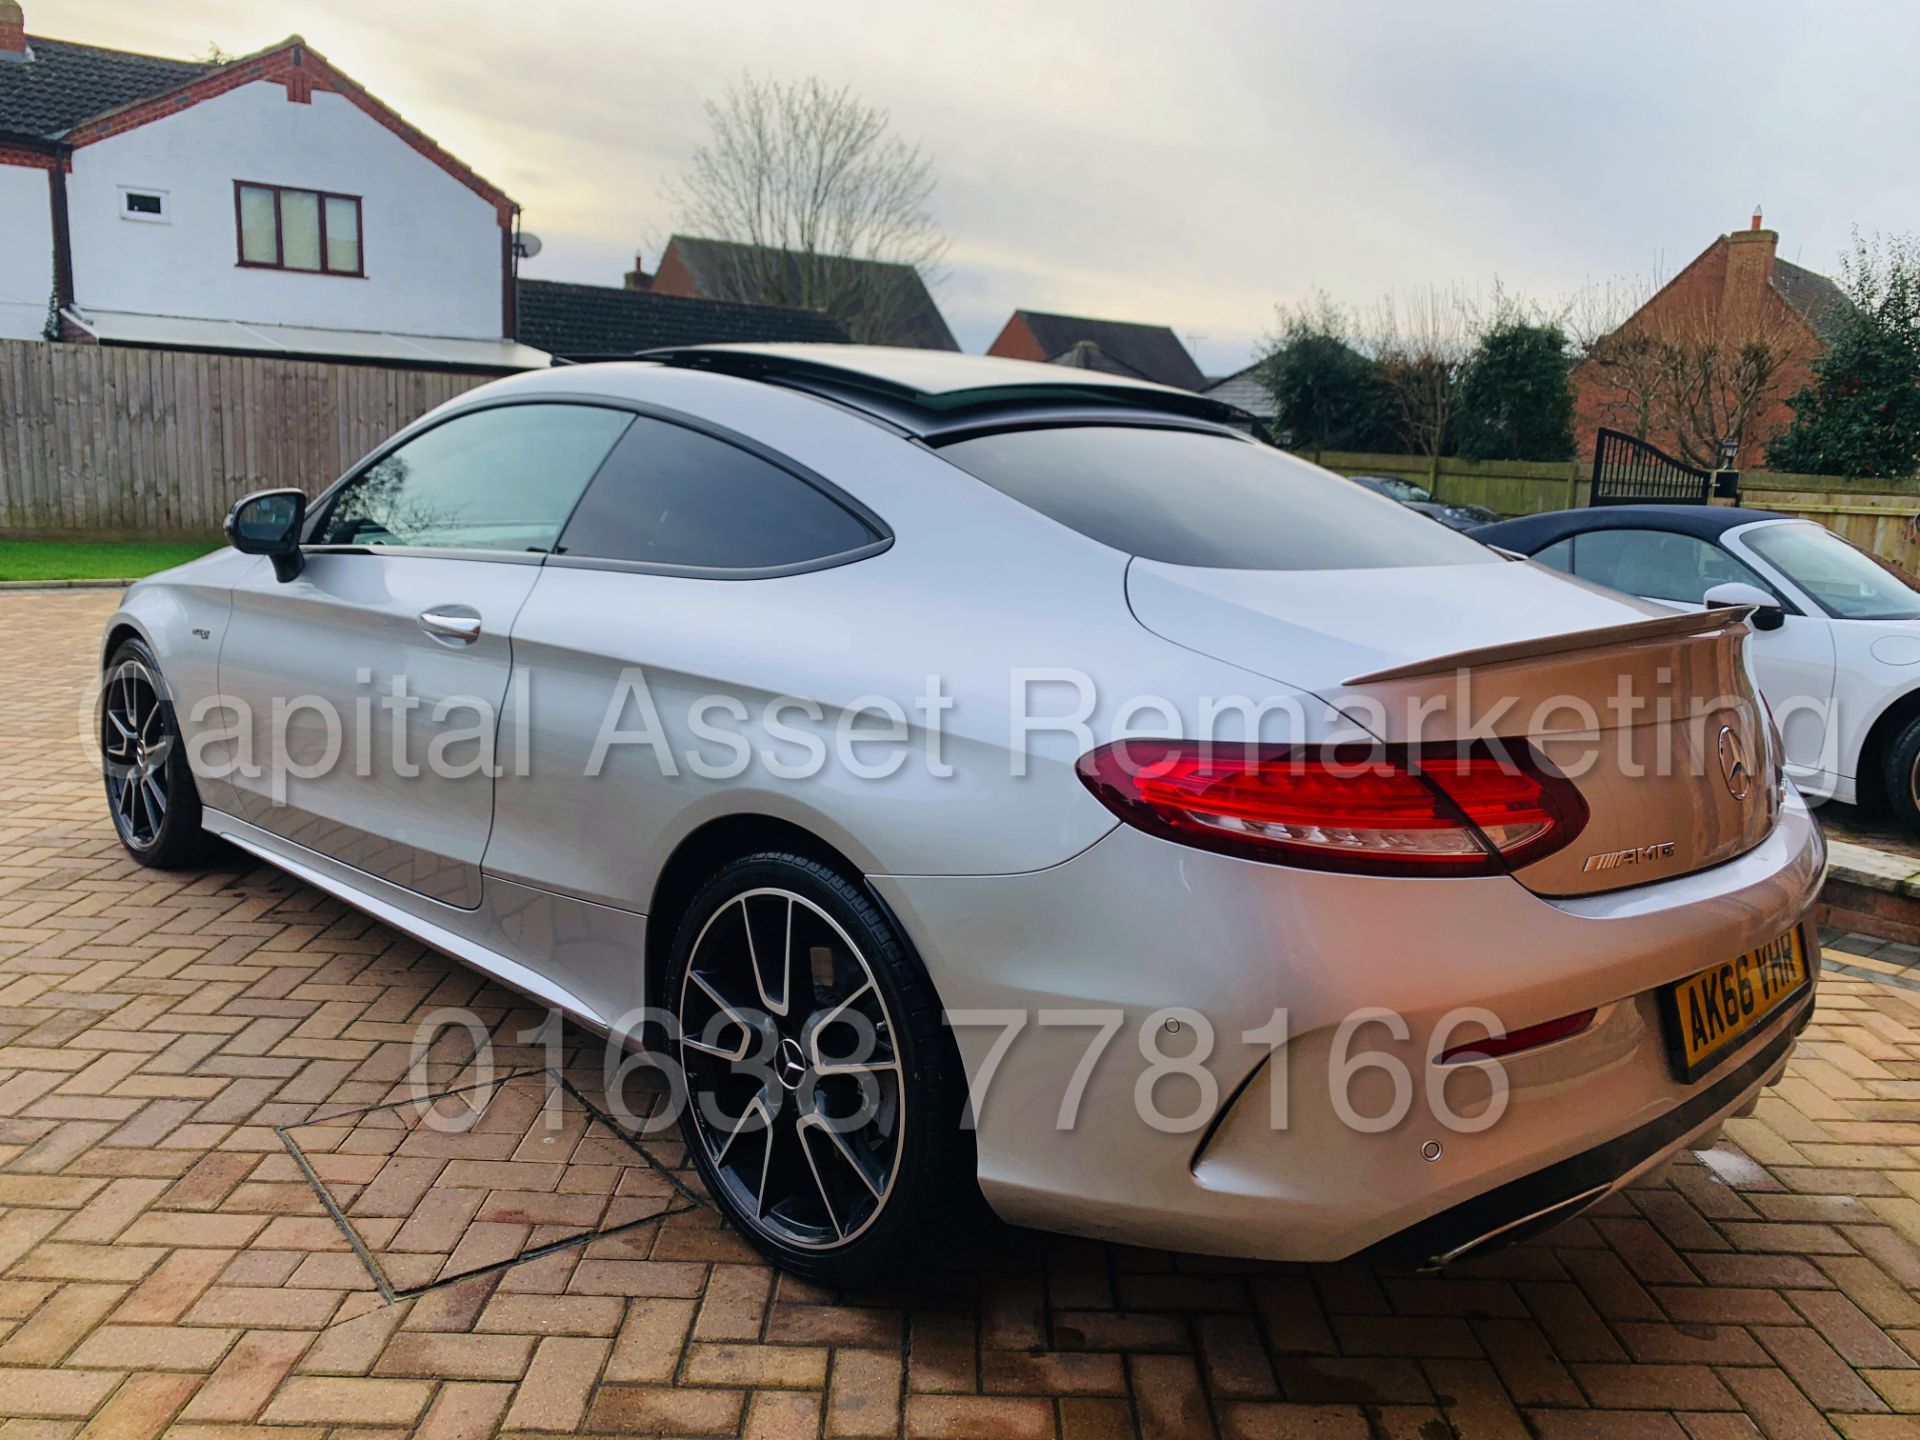 MERCEDES-BENZ C43 AMG *PREMIUM 4 MATIC* COUPE (2017) '9-G AUTO - LEATHER - SAT NAV' **FULLY LOADED** - Image 9 of 46